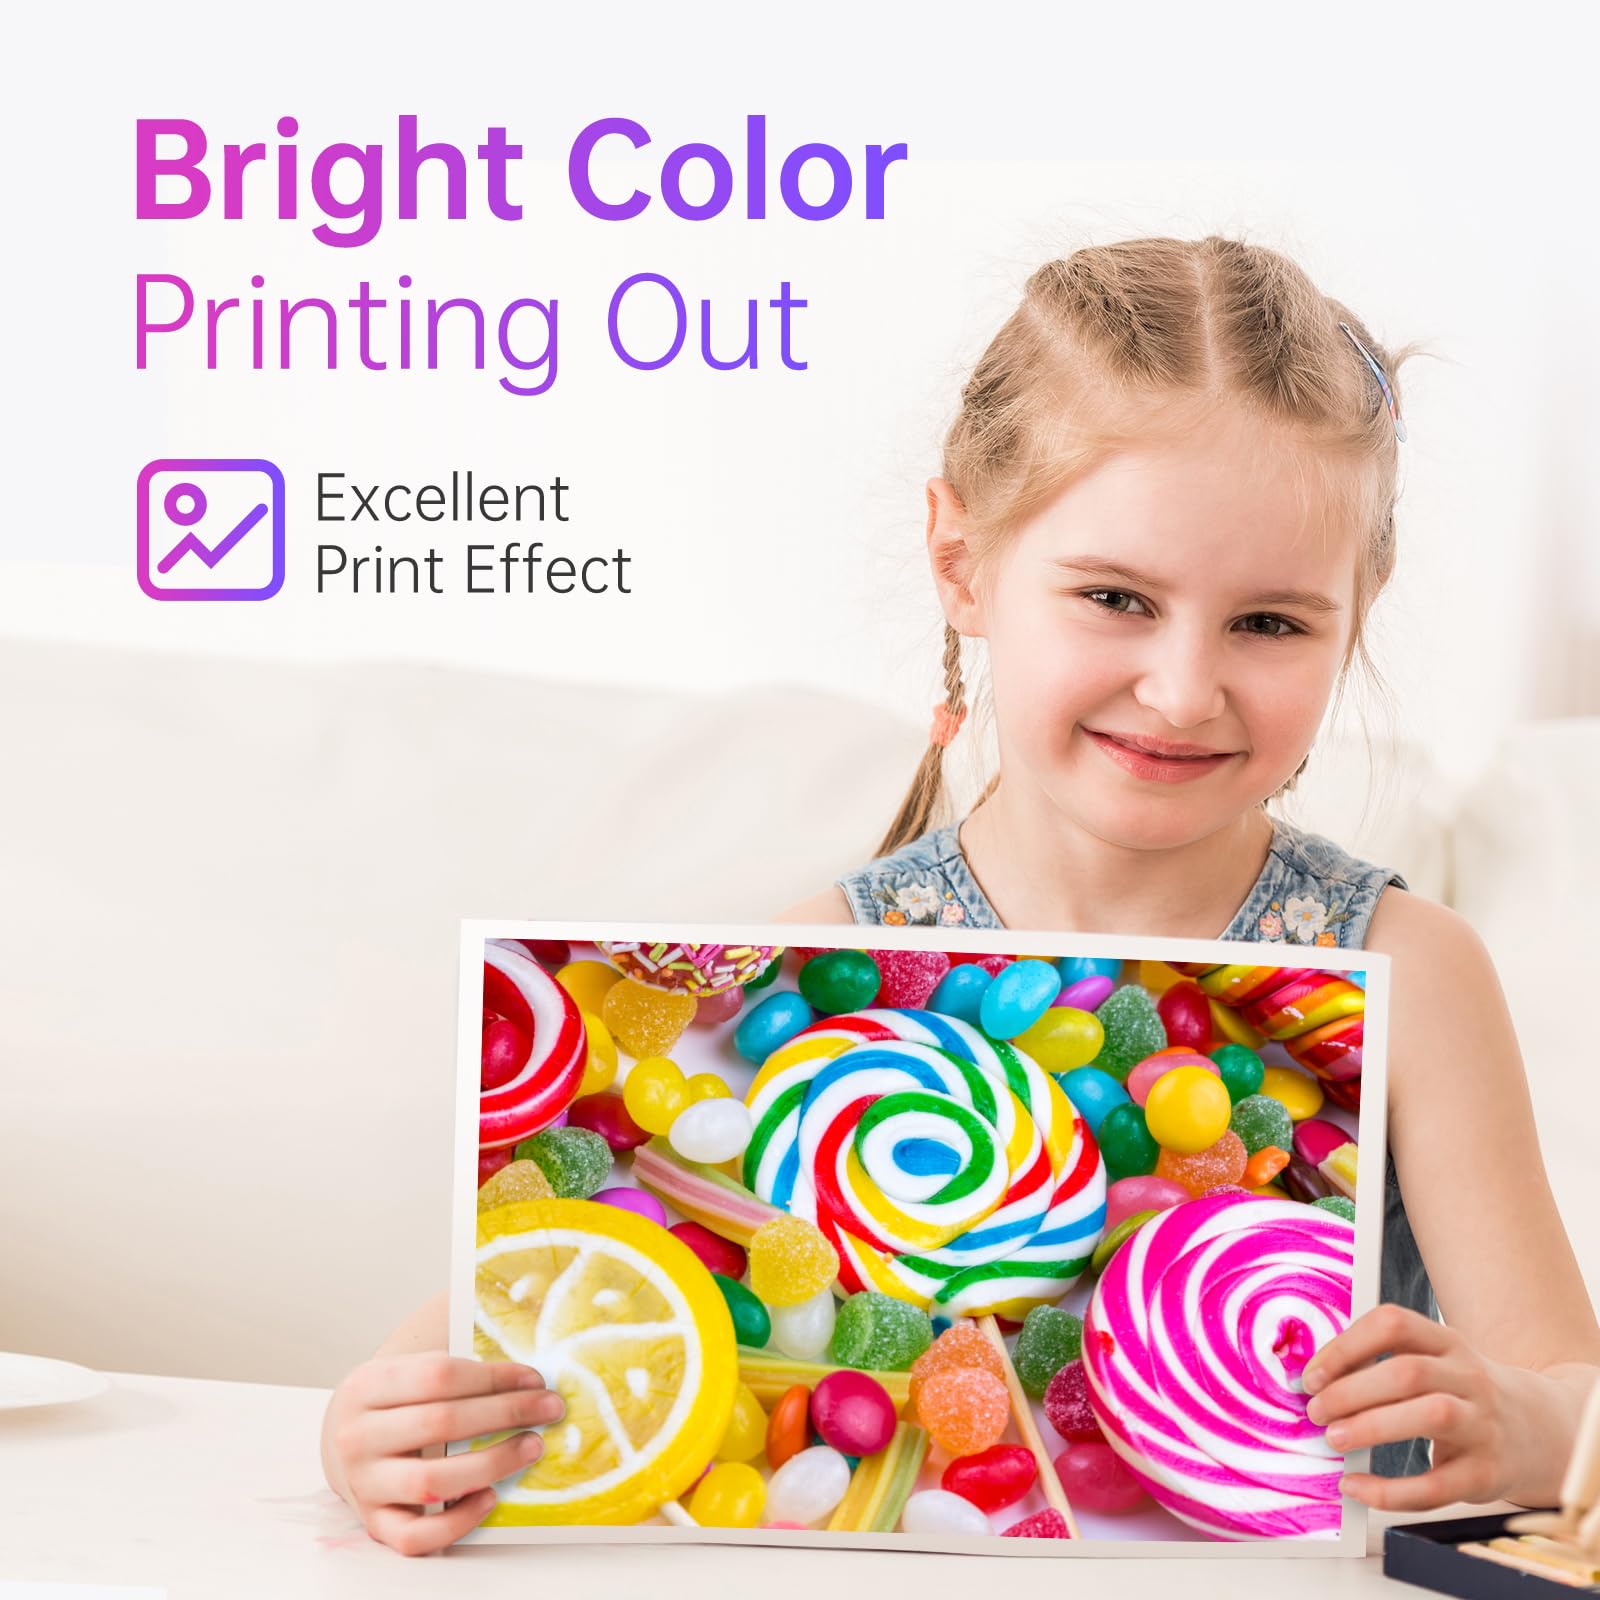 Girl holding a printout with bright colors and excellent print effect